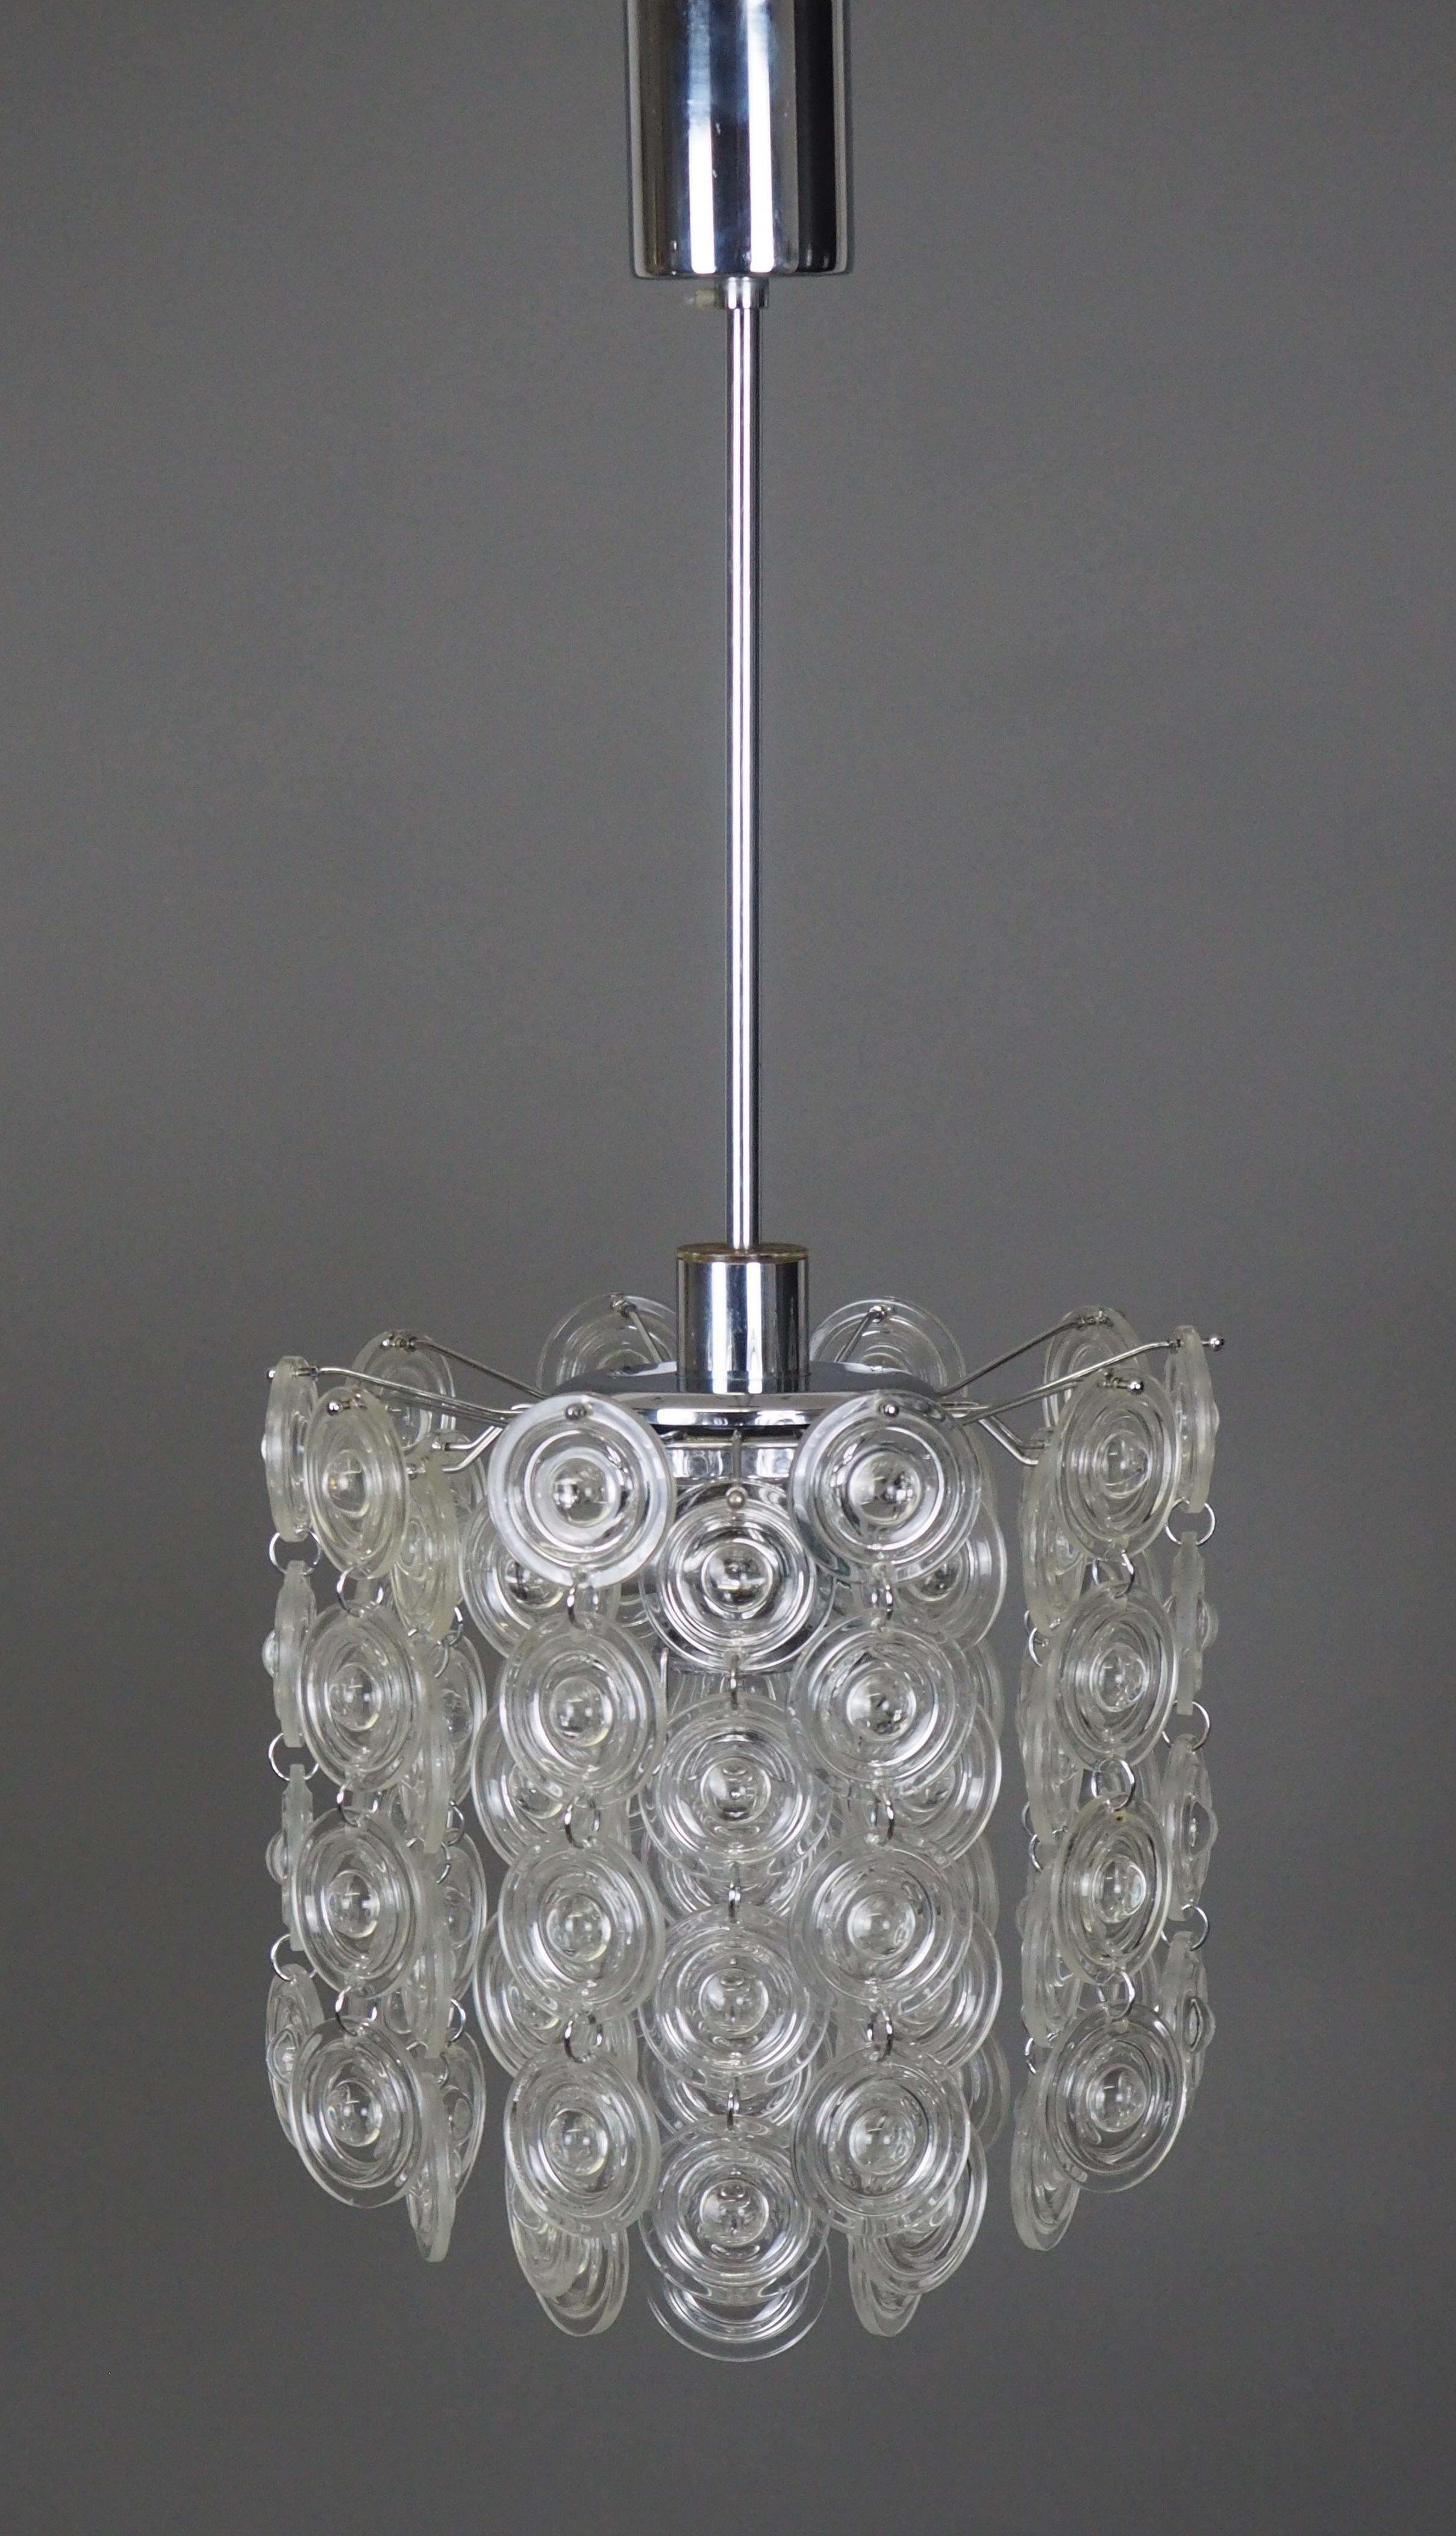 Rare Set of Glass and Nickel Light Fixtures by Sciolari, circa 1970s For Sale 2